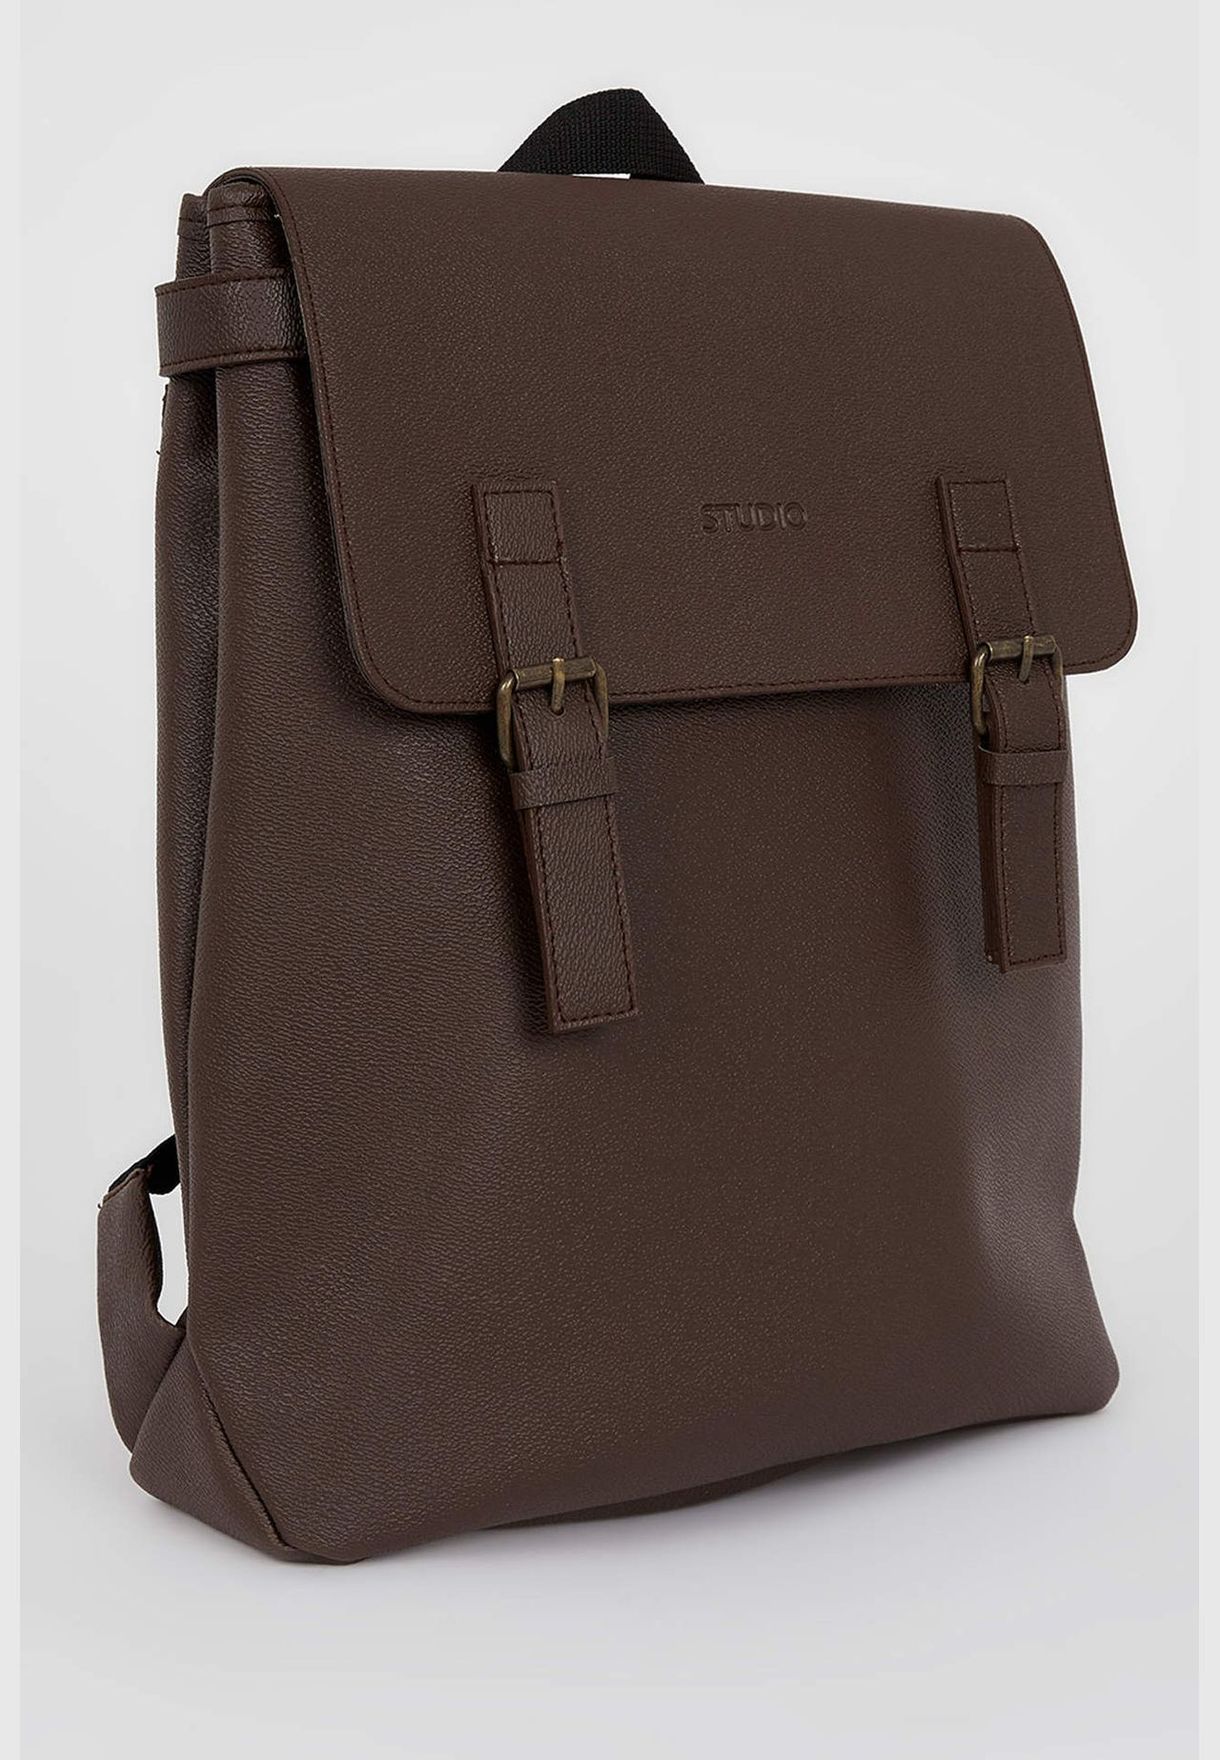 Man Faux Leather Backpack